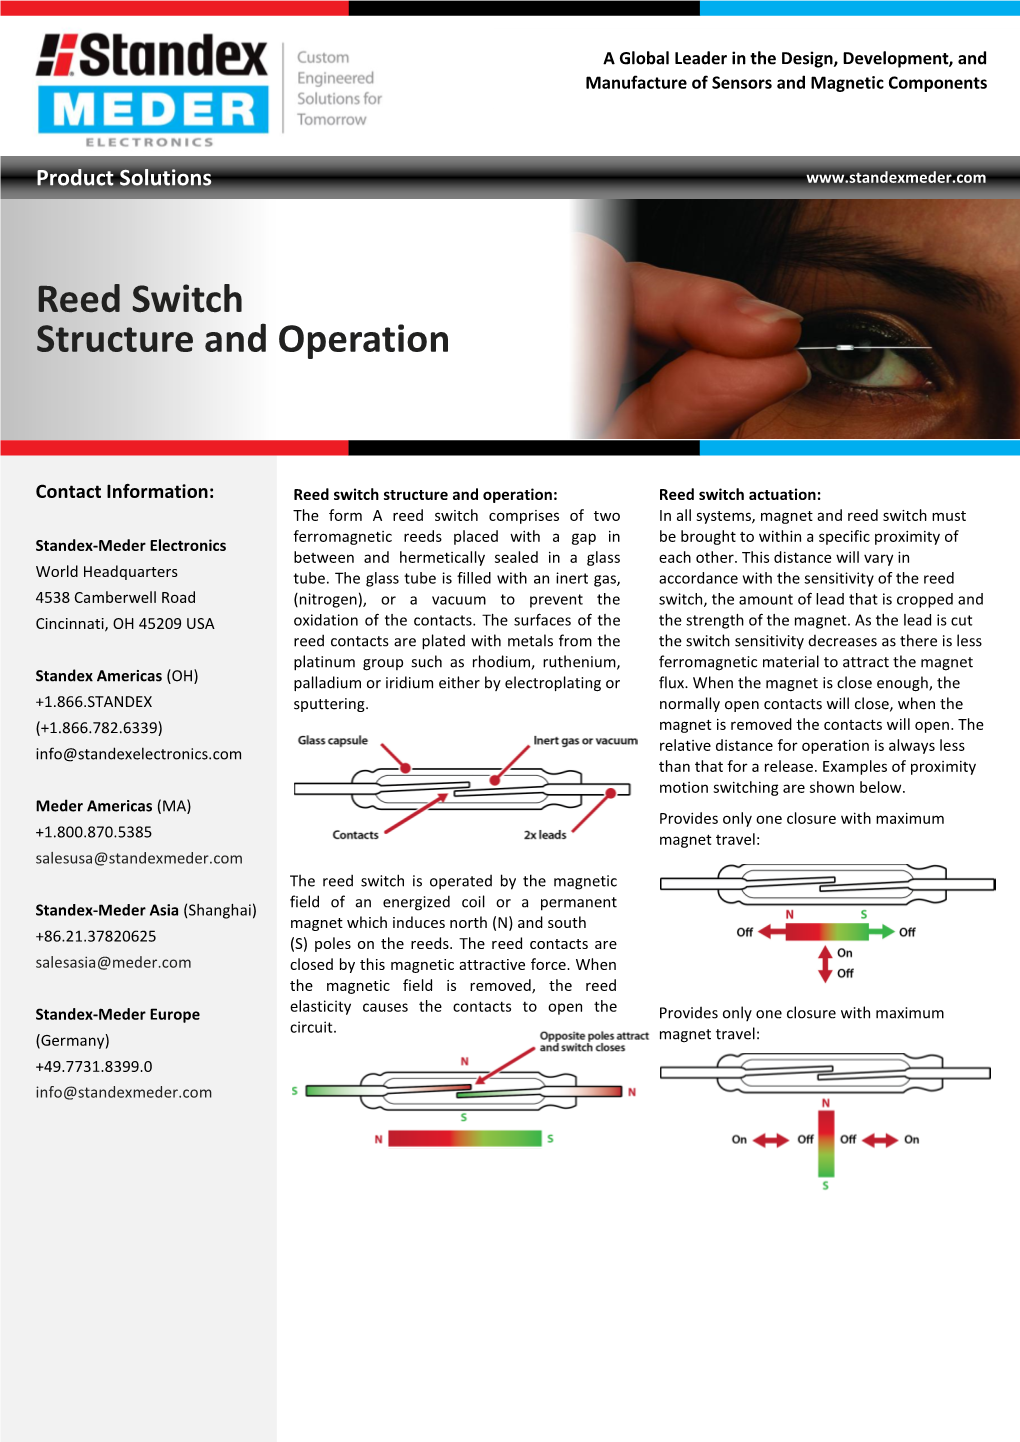 Reed Switch Structure and Operation